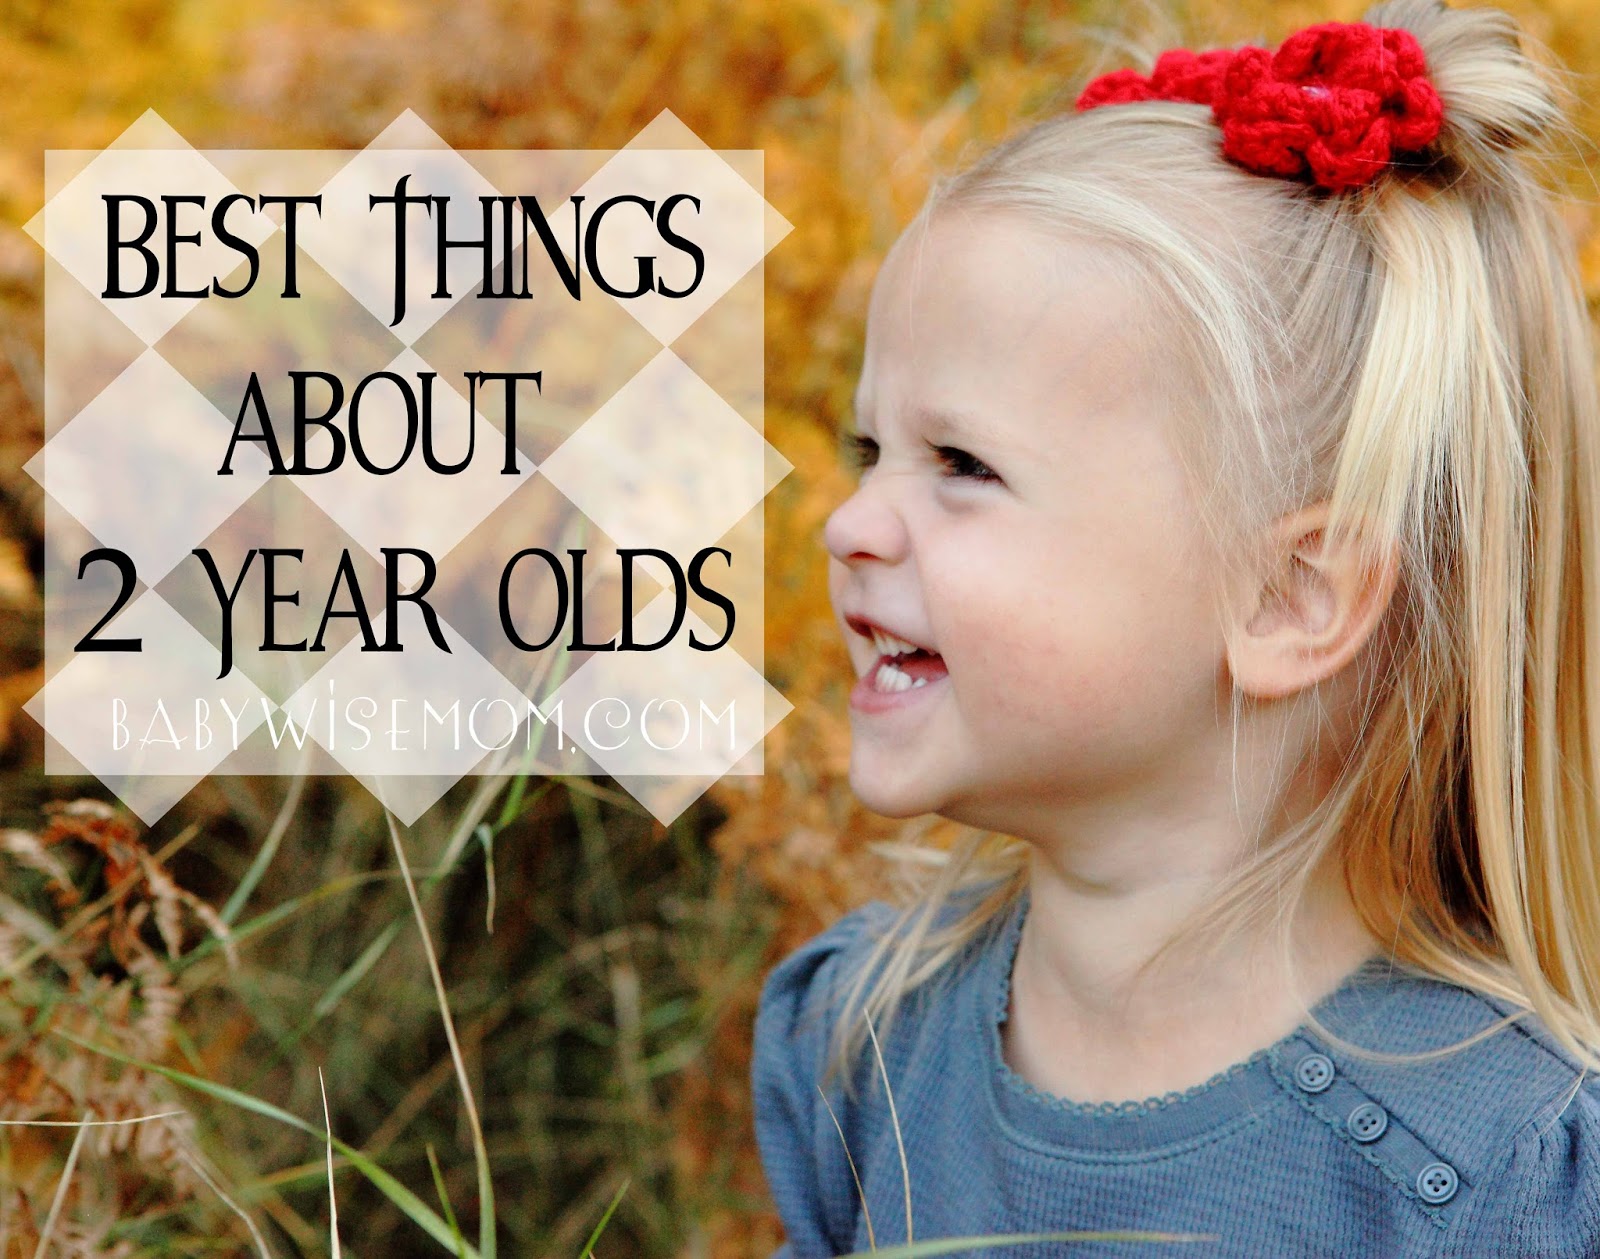  The Best Things About Two Year Olds